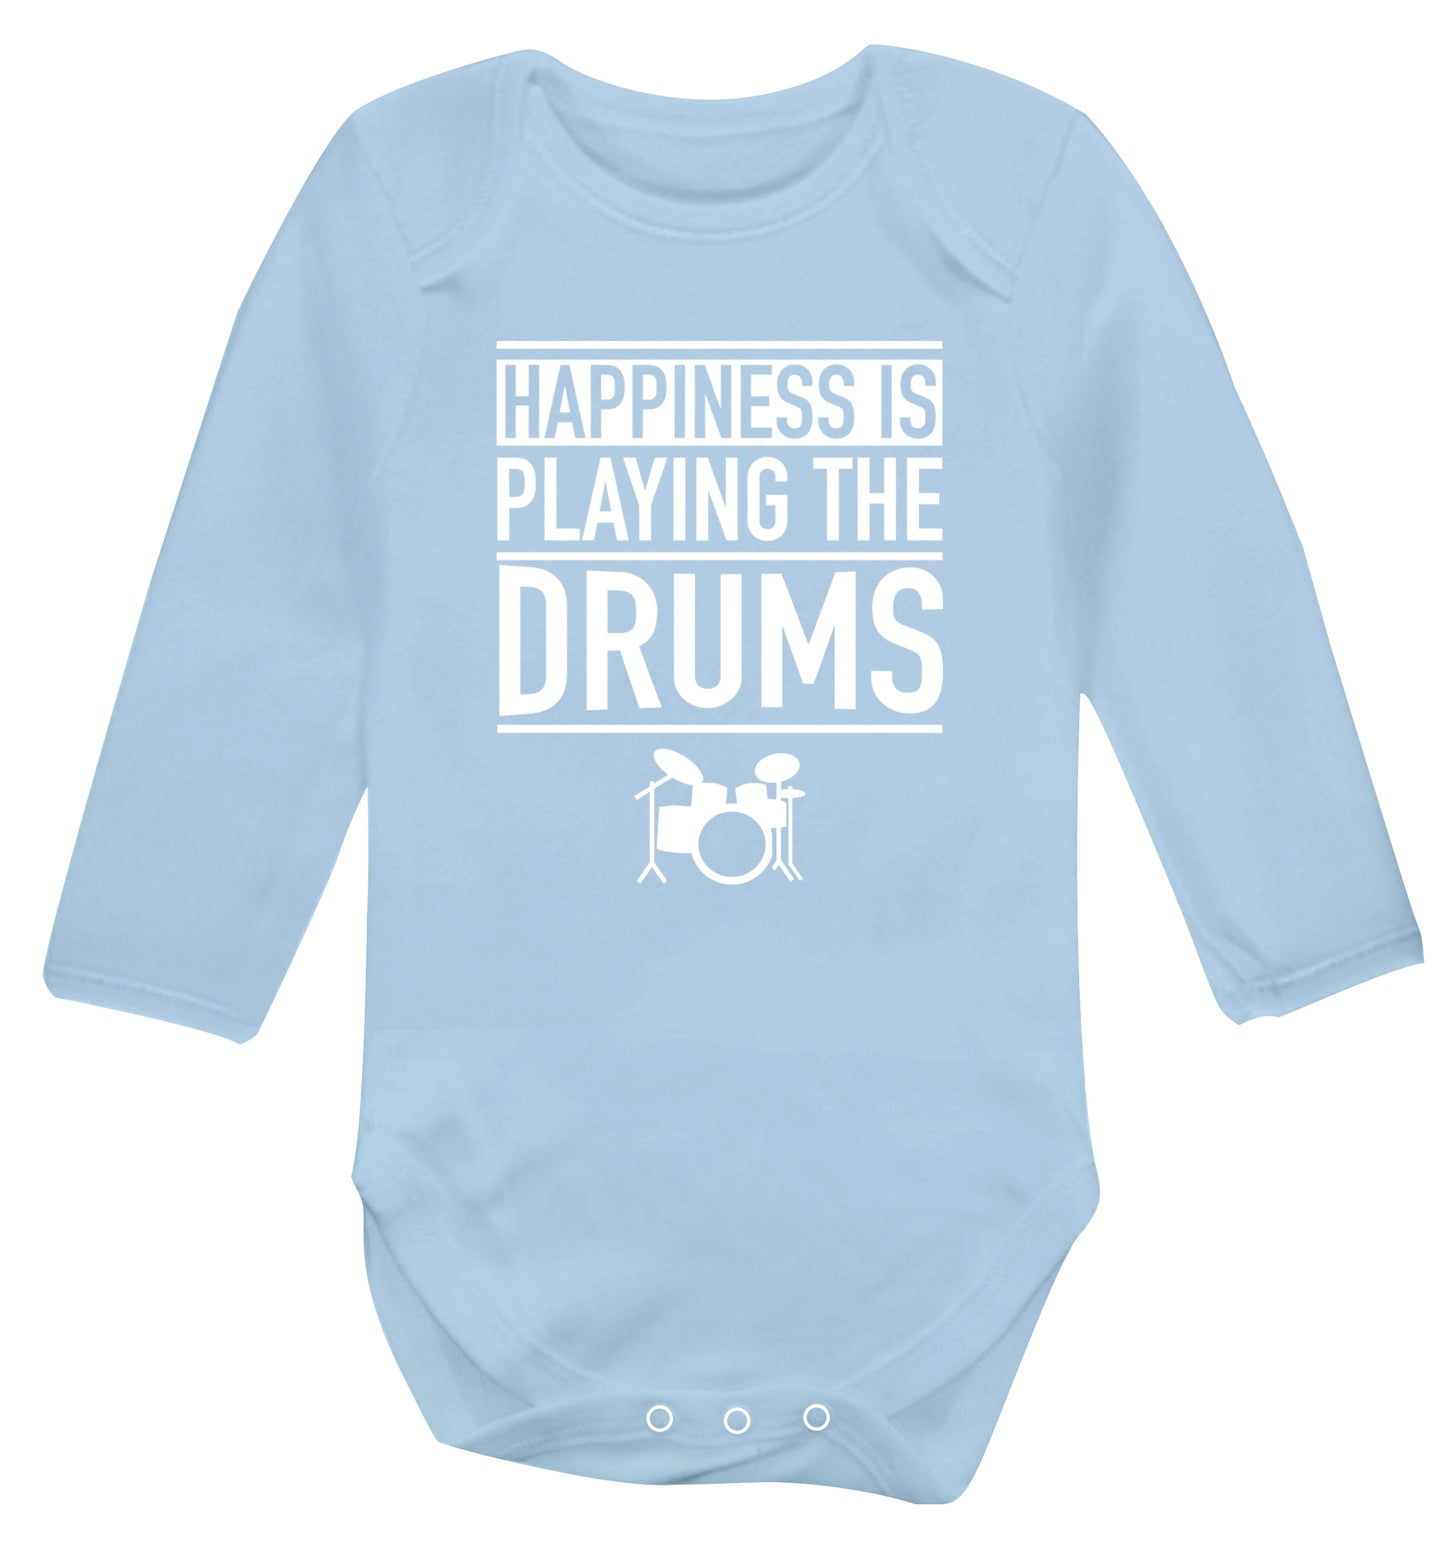 Happiness is playing the drums Baby Vest long sleeved pale blue 6-12 months